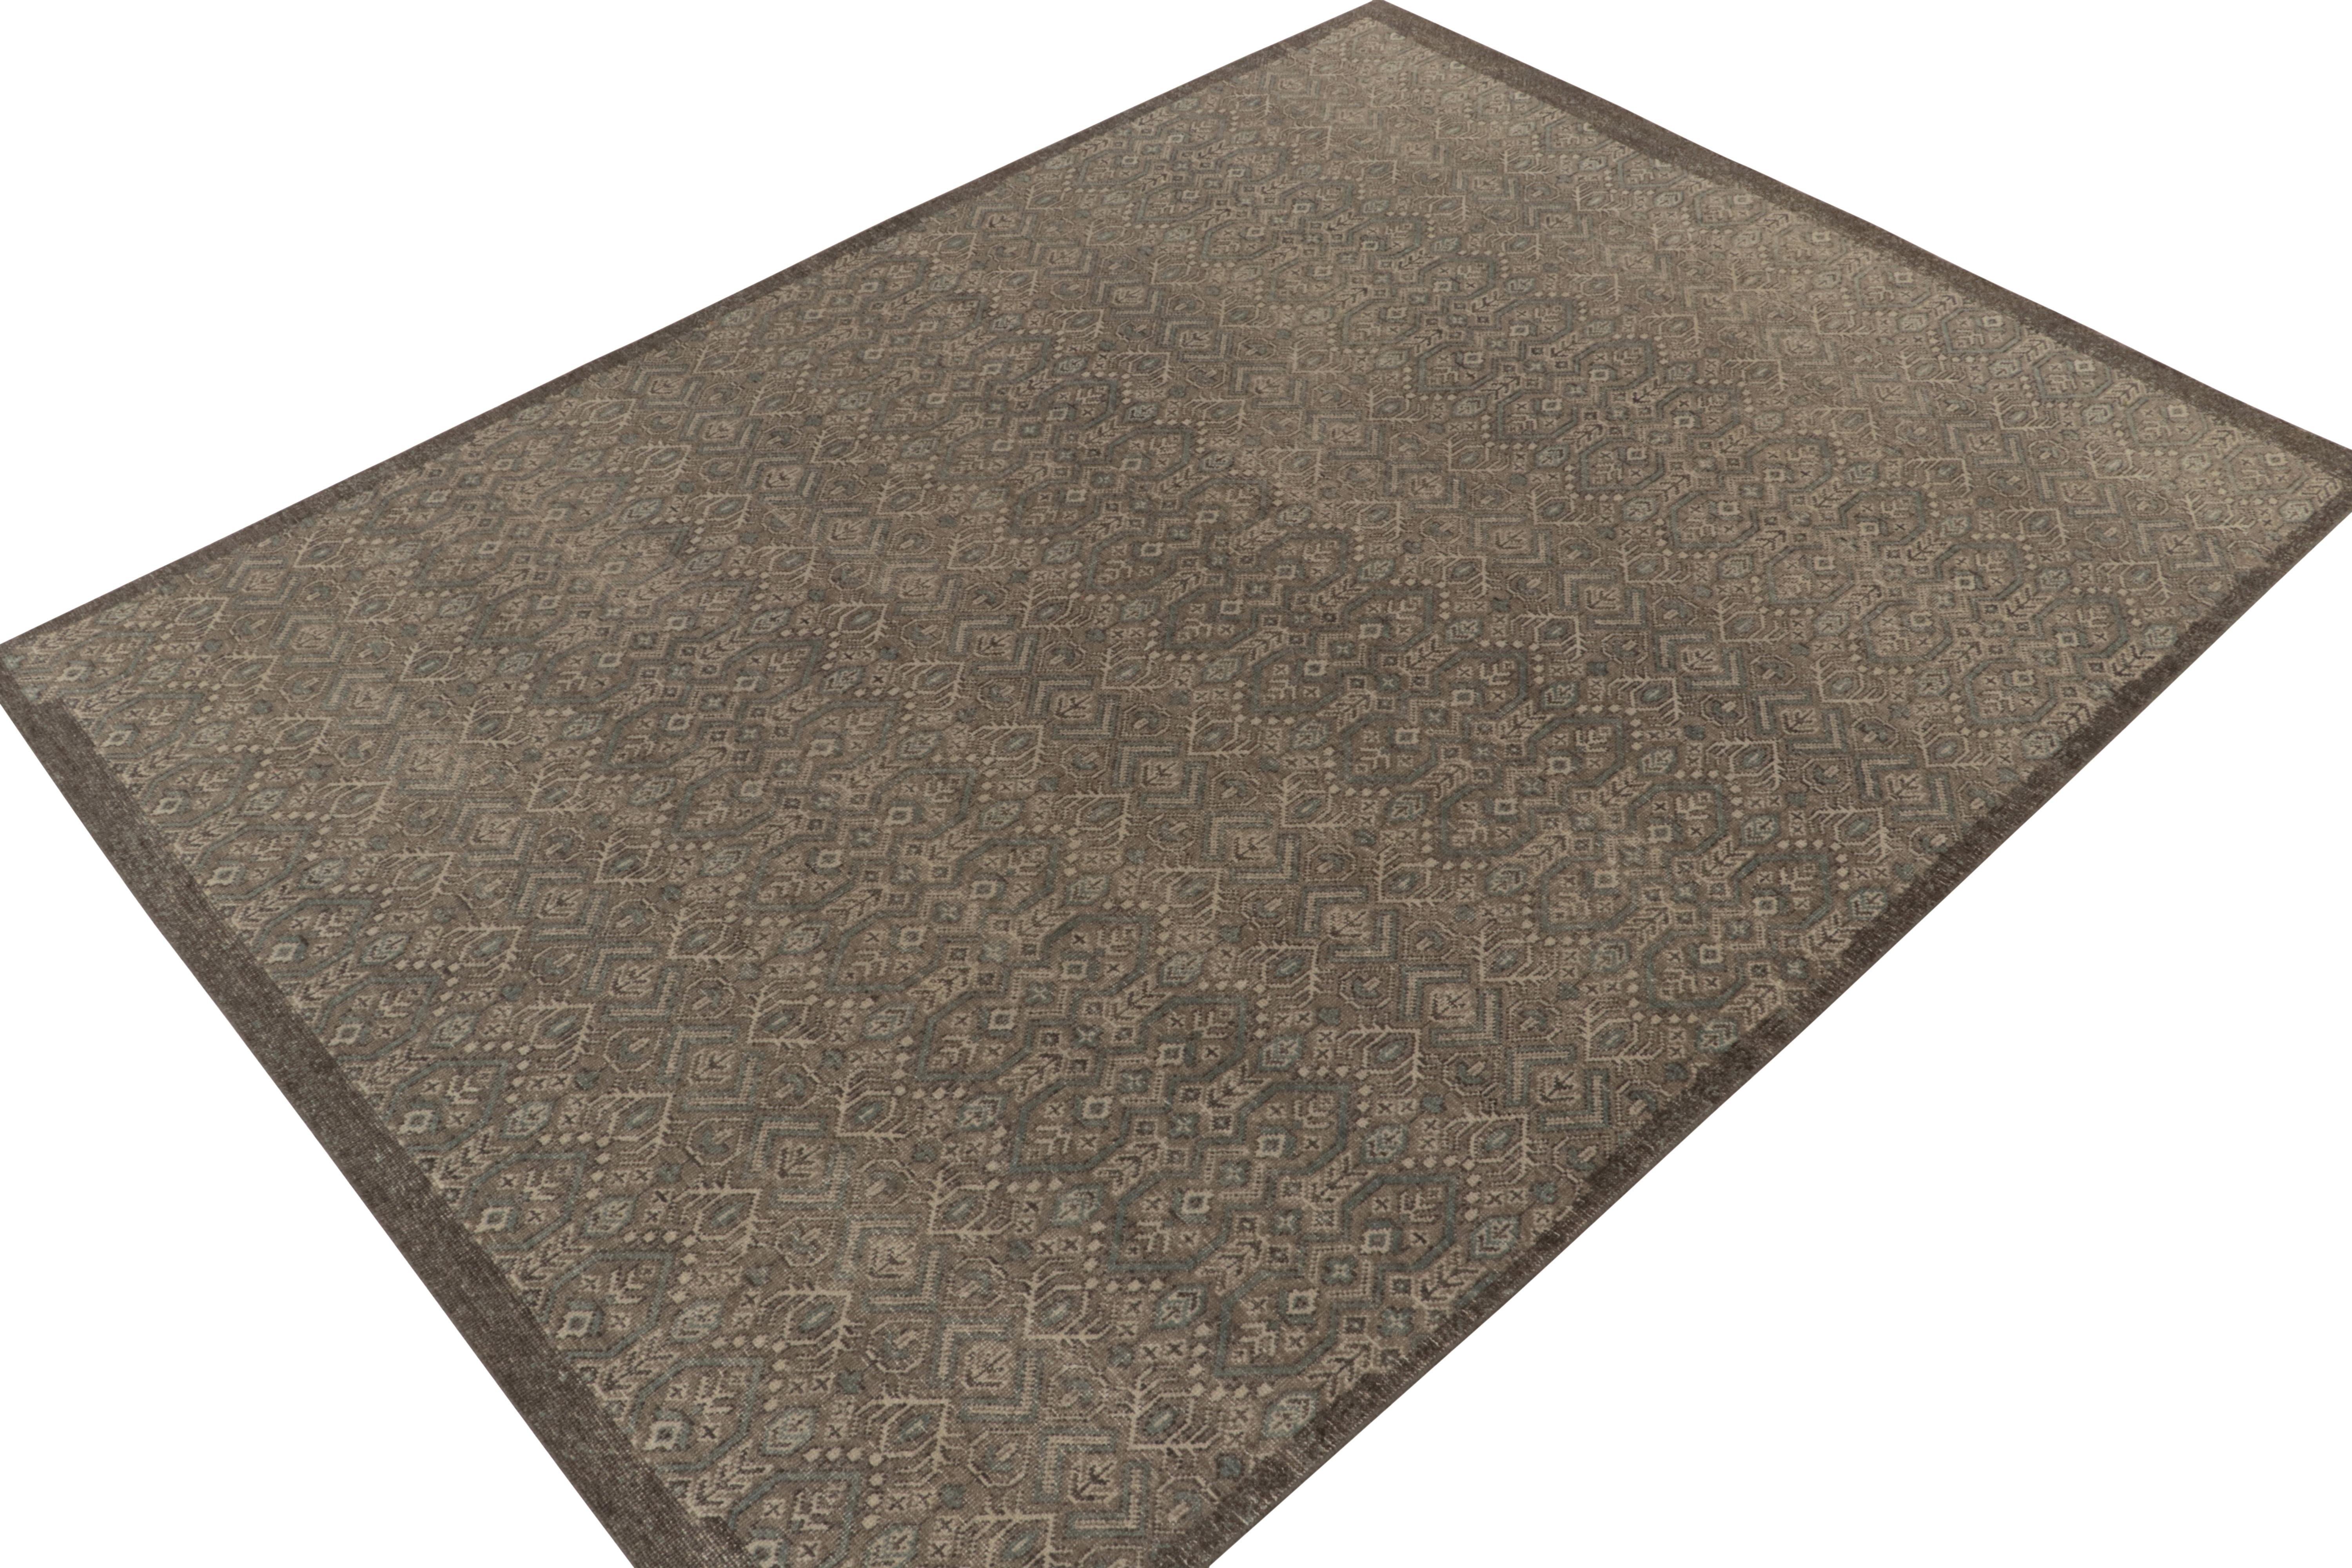 A scintillating 9x12 hand-knotted wool rug from Rug & Kilim’s Homage Collection—a smart encyclopedia of patterns and iconic aesthetics. 

This creation features a rustic modern take on tribal style in beige-brown & aegean blue, naturally